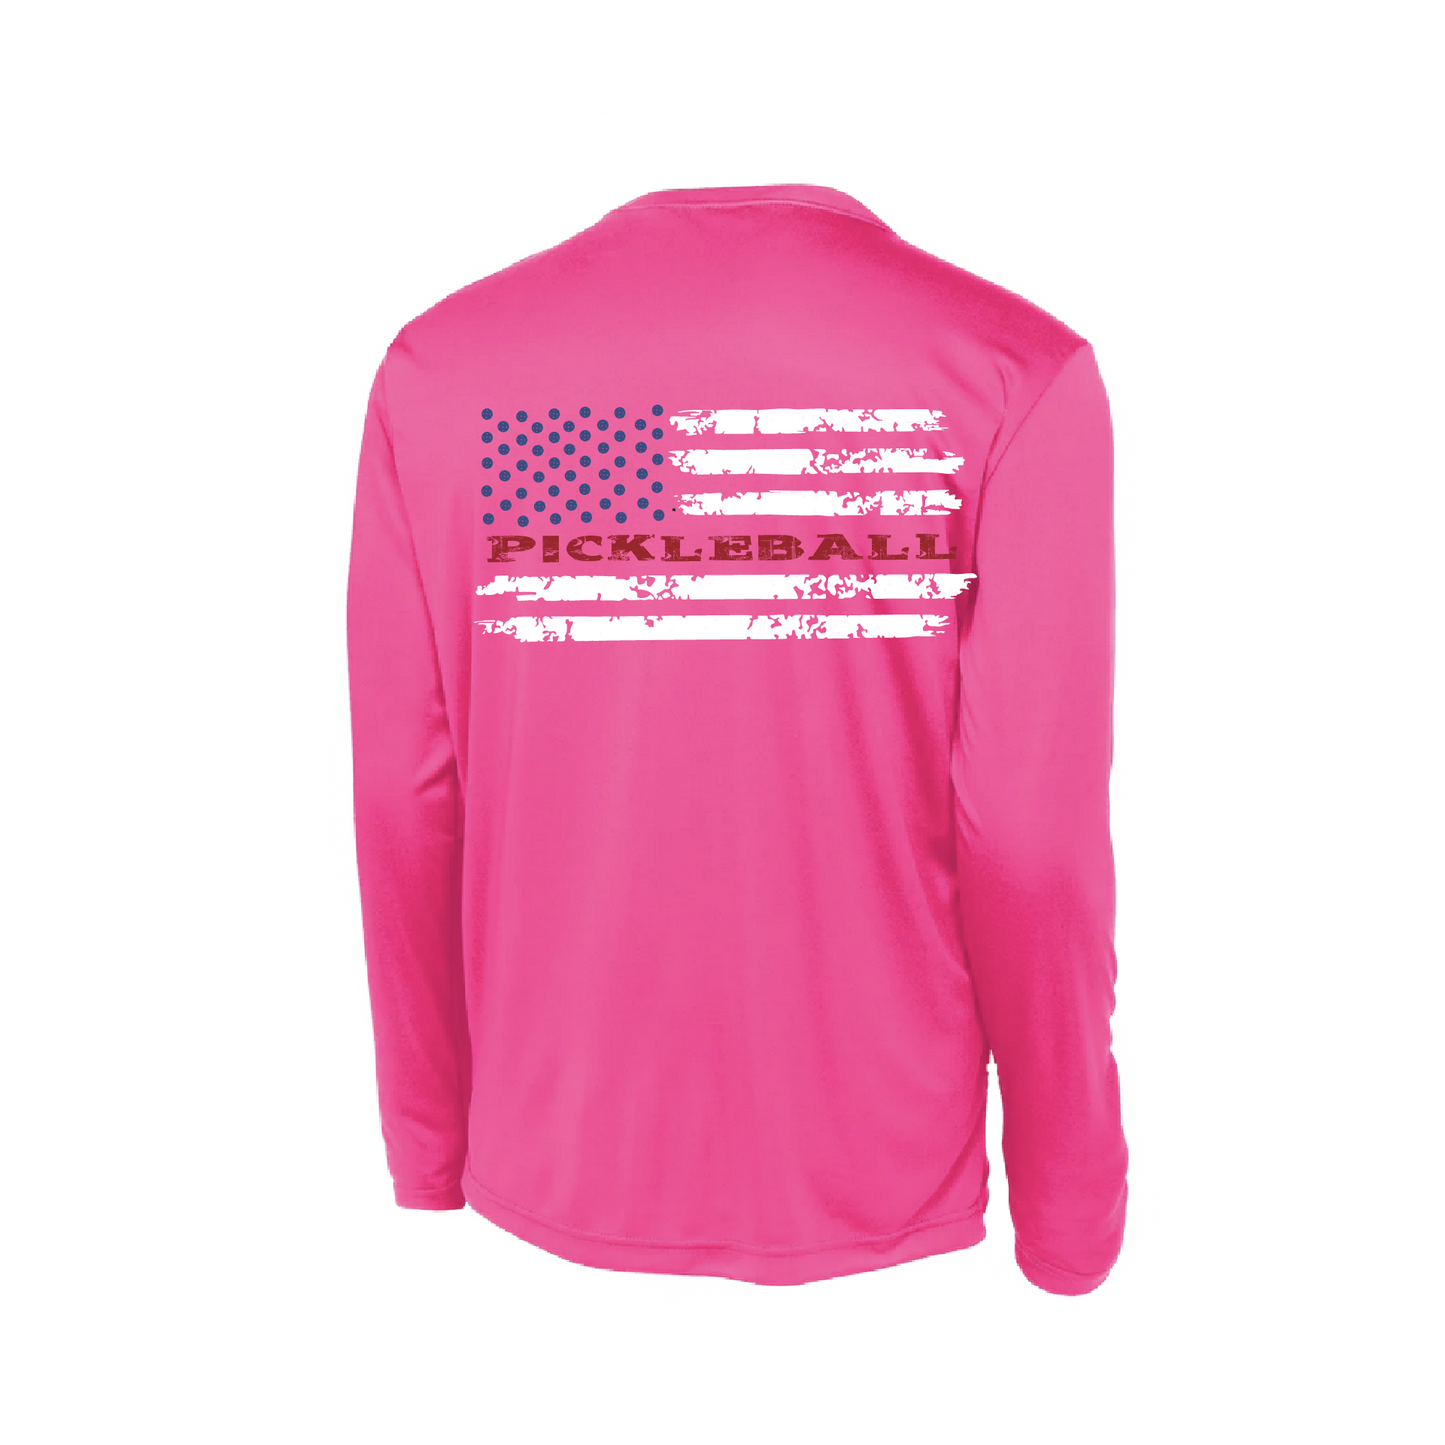 Pickleball Design: Pickleball Flag Horizontal on Front or Back of Shirt  Youth Style: Long Sleeve  Shirts are lightweight, roomy and highly breathable. These moisture-wicking shirts are designed for athletic performance. They feature PosiCharge technology to lock in color and prevent logos from fading. Removable tag and set-in sleeves for comfort.